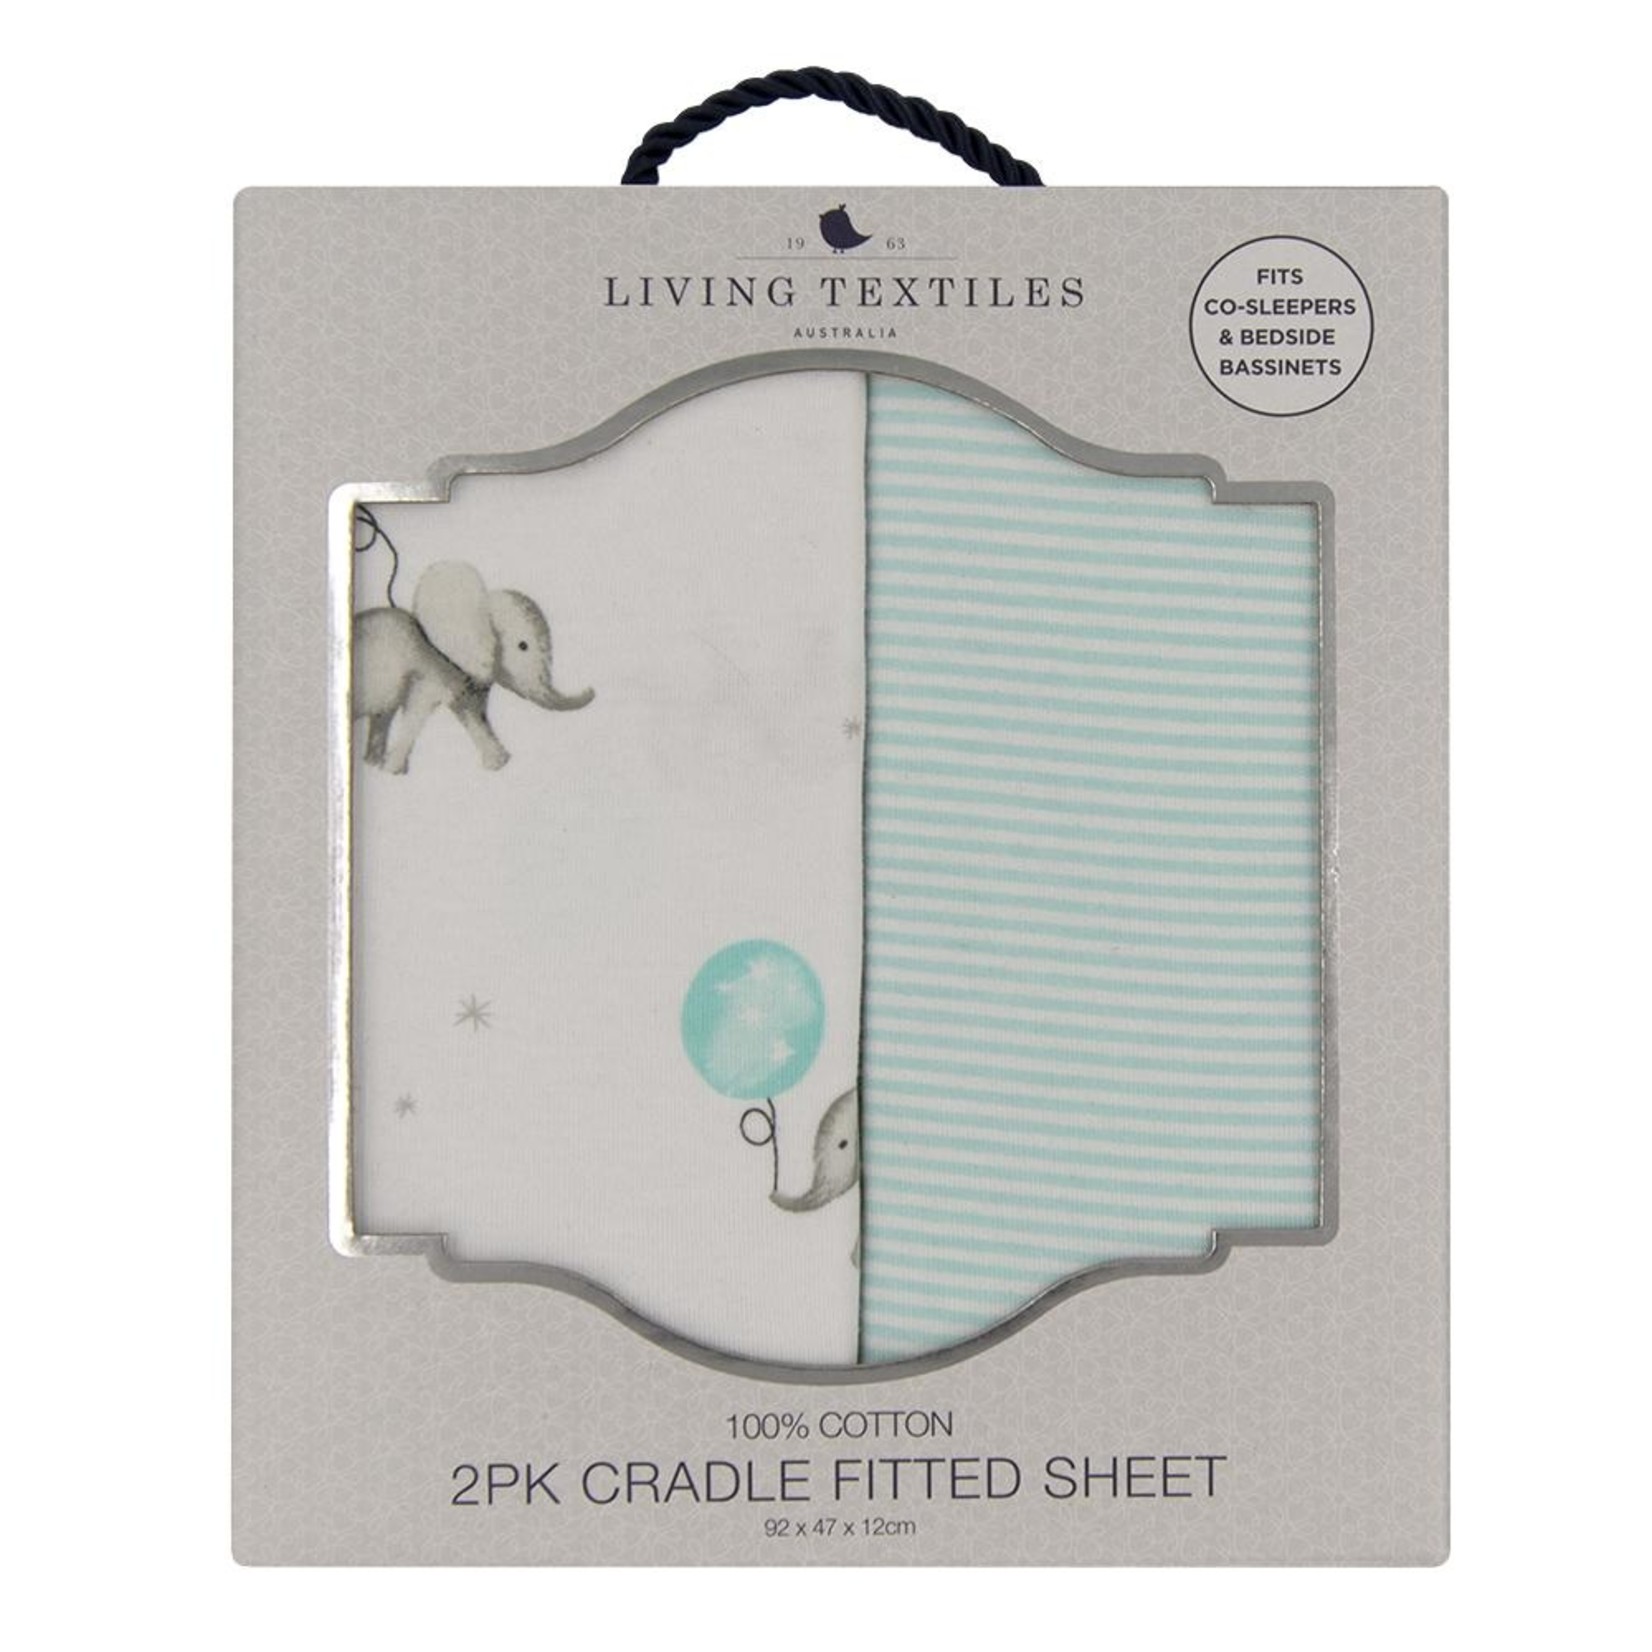 Living Textiles 2-PACK JERSEY CRADLE/CO-SLEEPER FITTED SHEETS - DREAM BIG/AQUA STRIPE